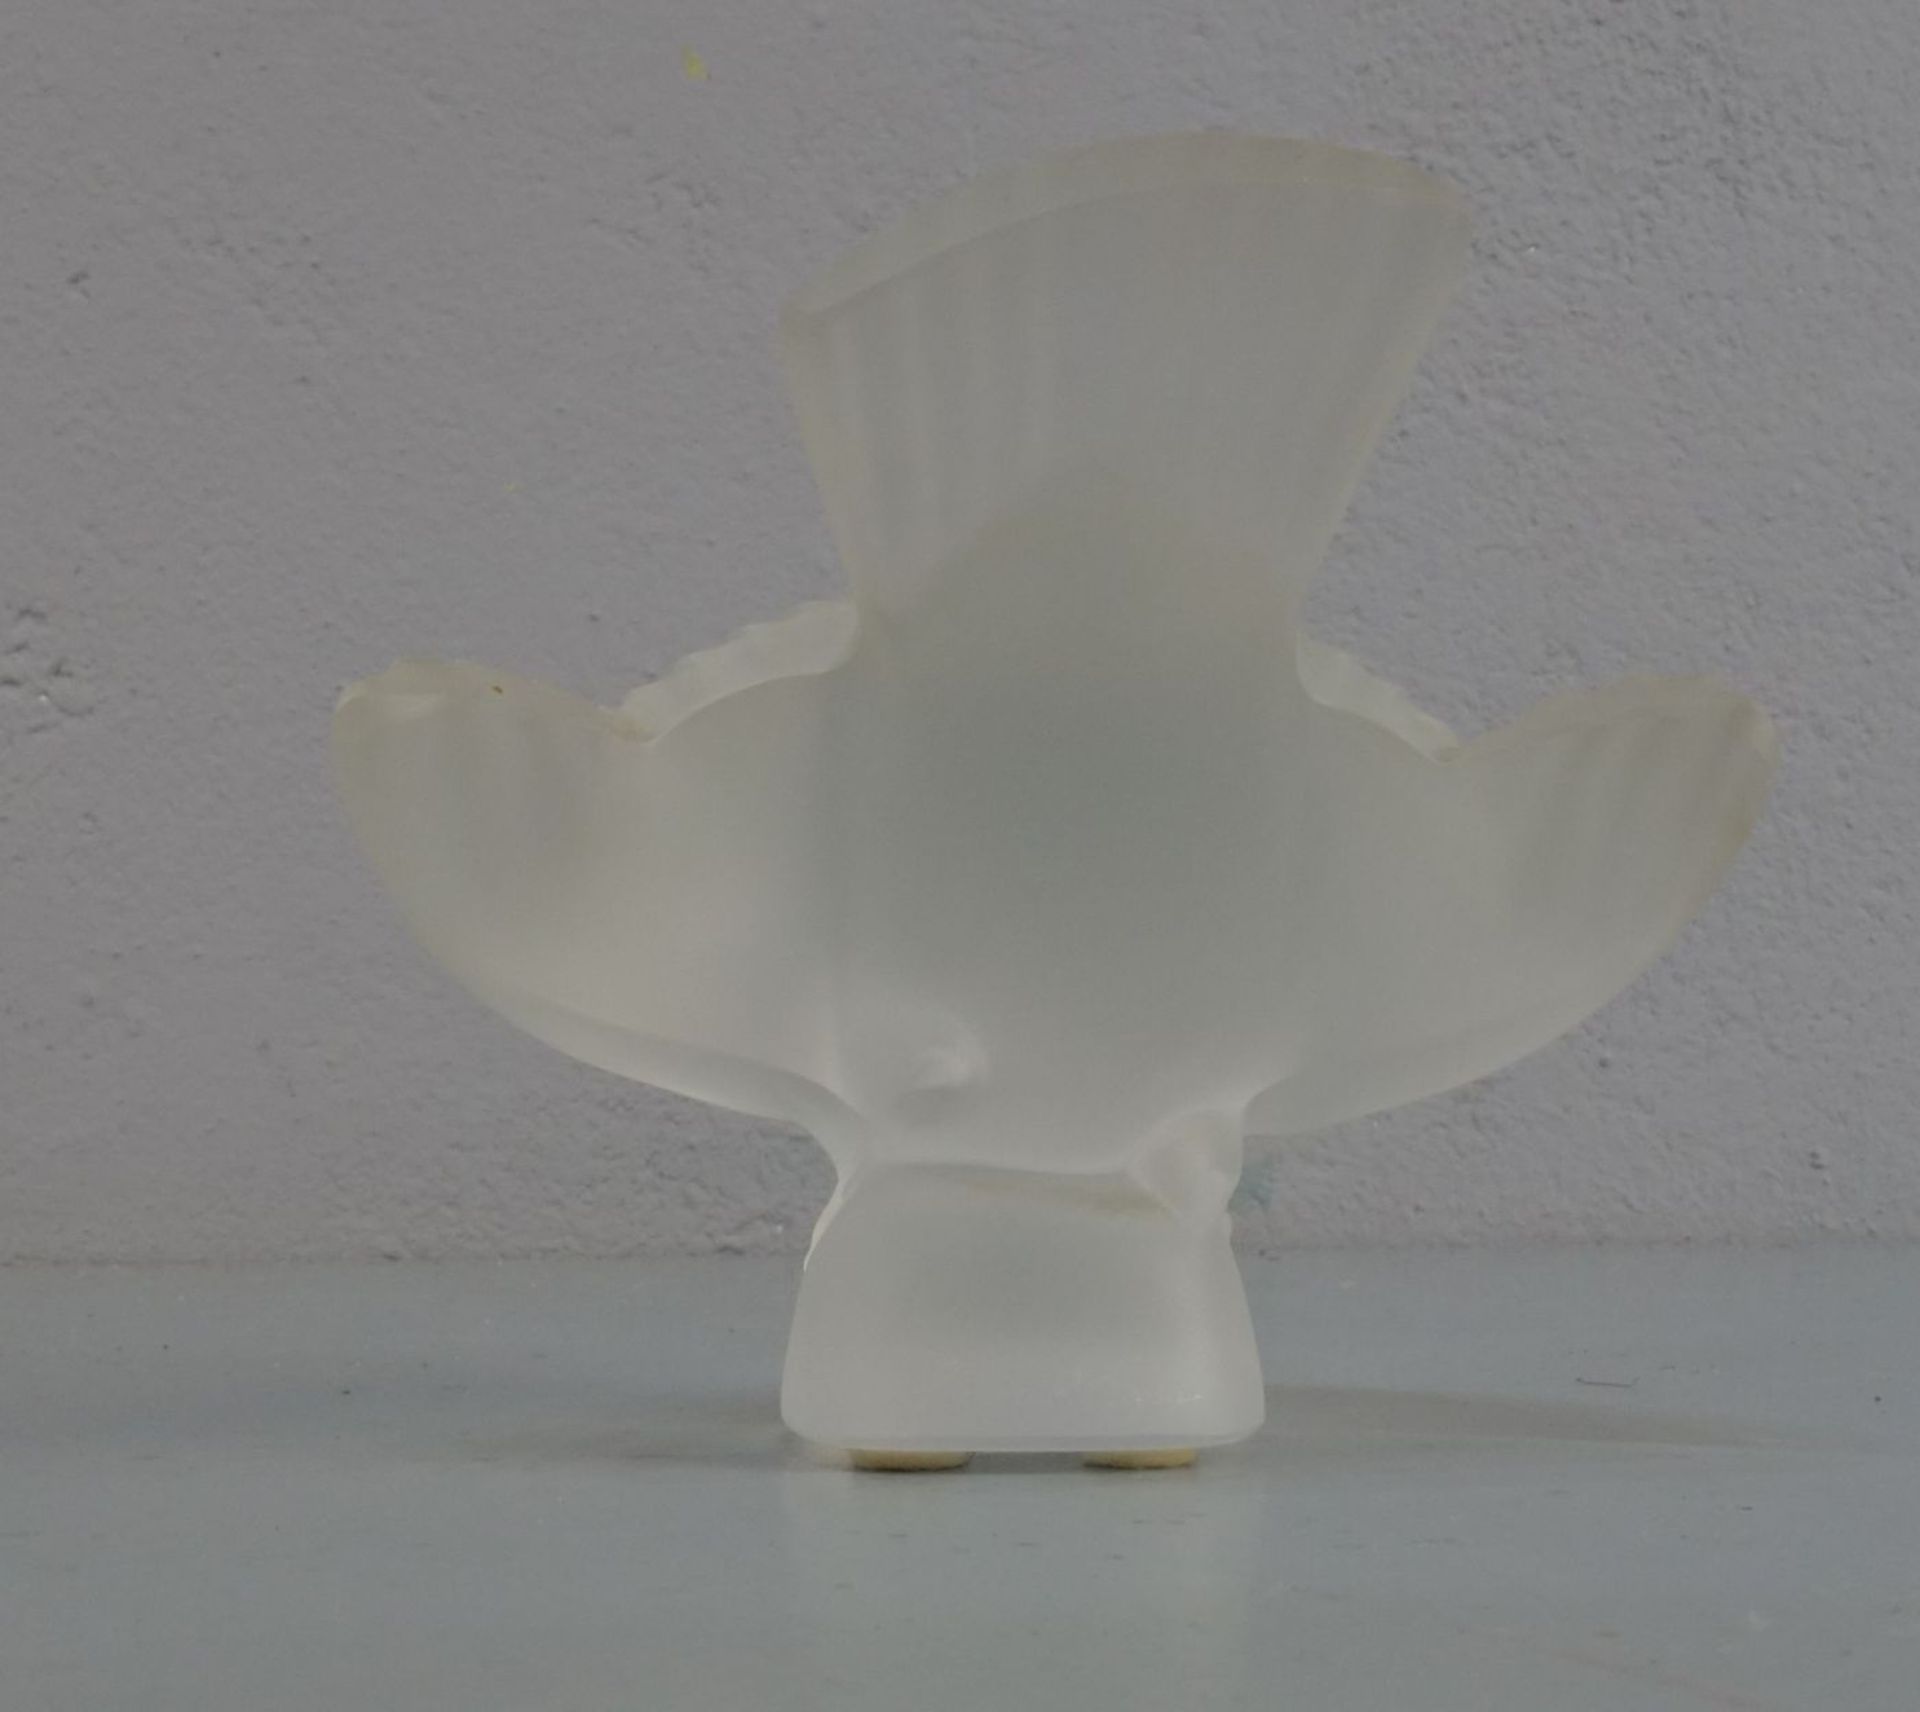 LALIQUE GLASFIGUR / PAPERWEIGHT "VOGEL" - Image 4 of 4